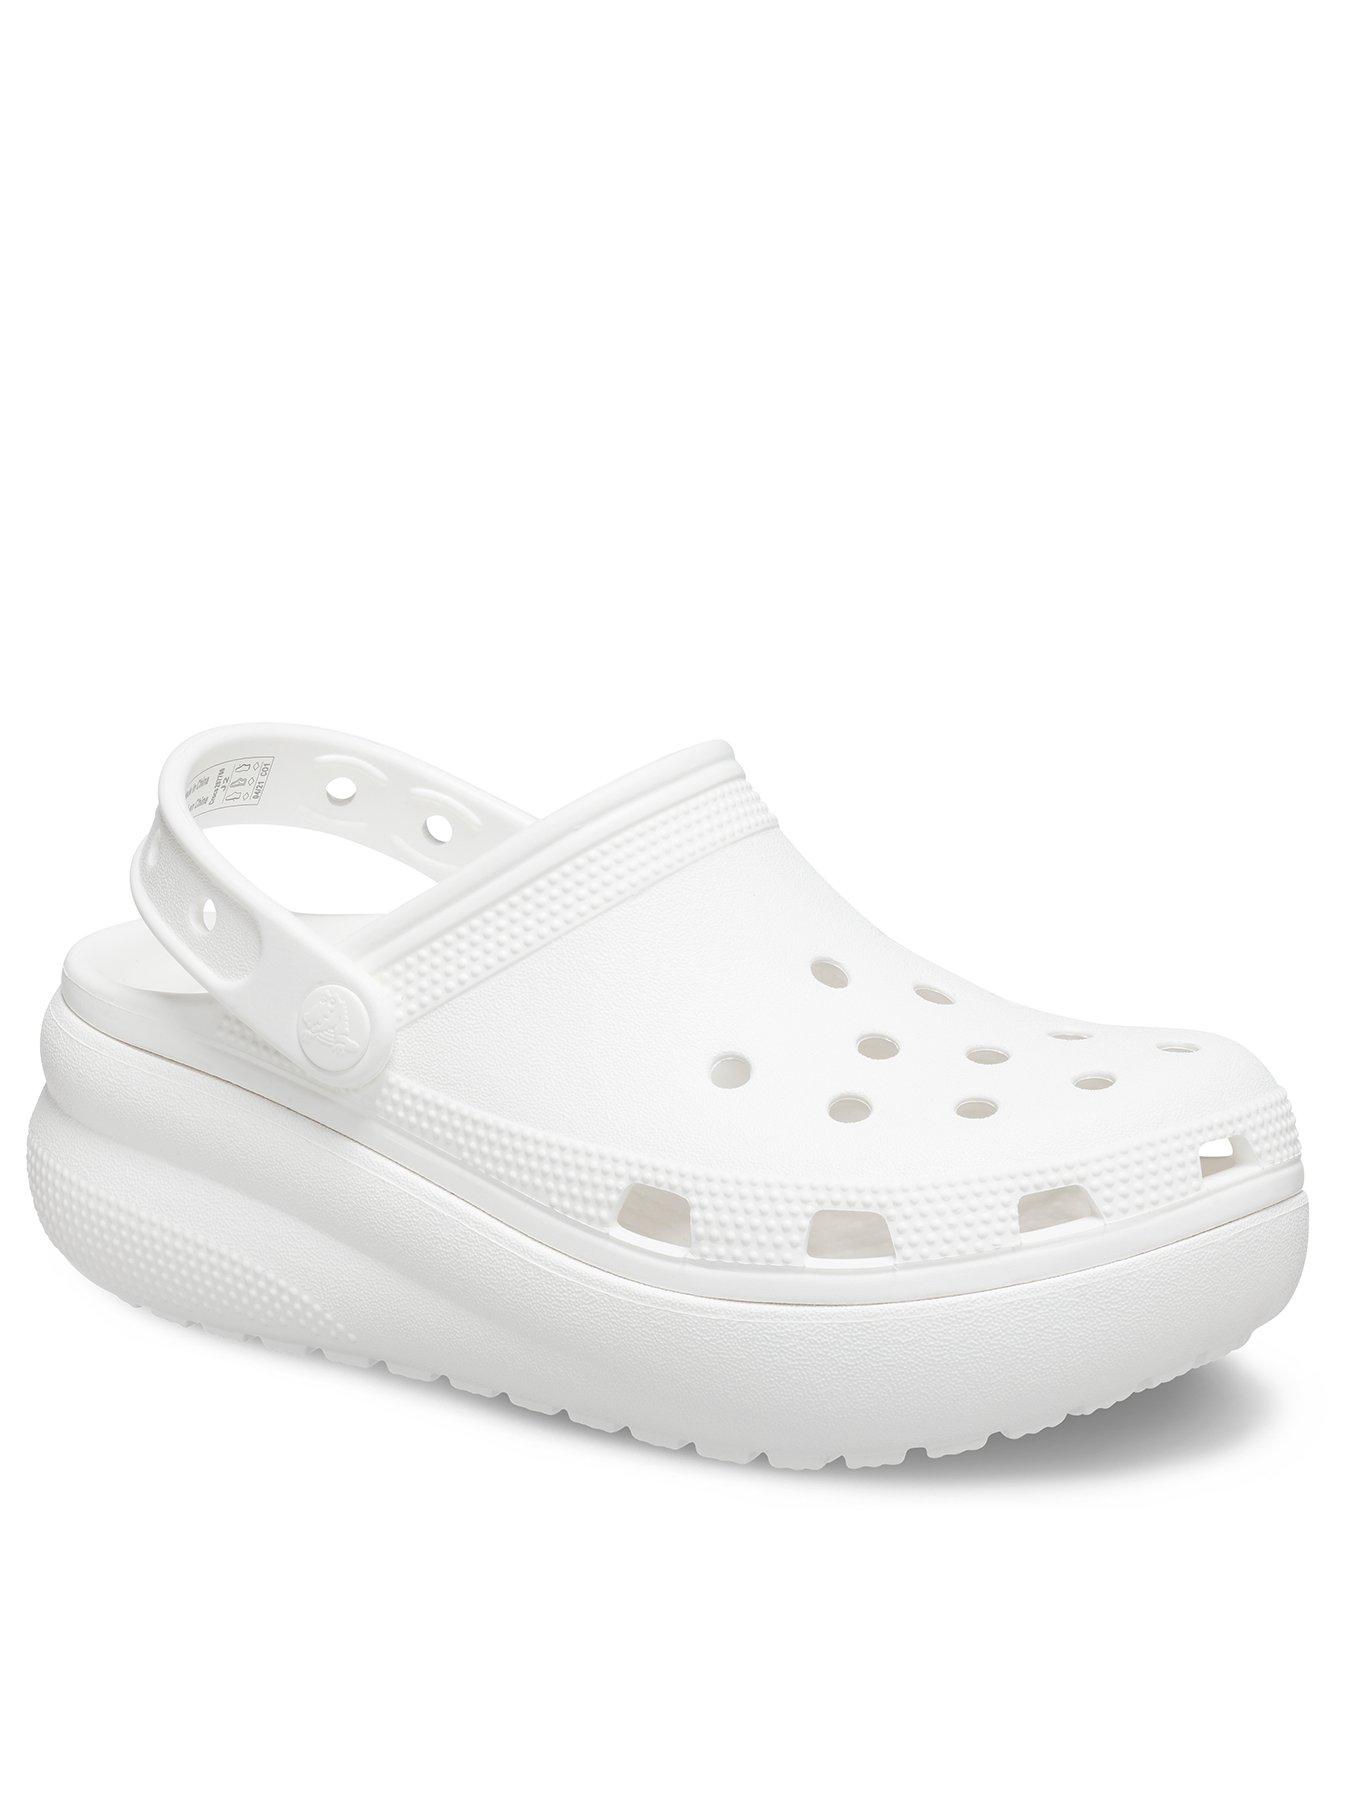 Crocs Classic Cutie Clog, White, Size 13 Younger